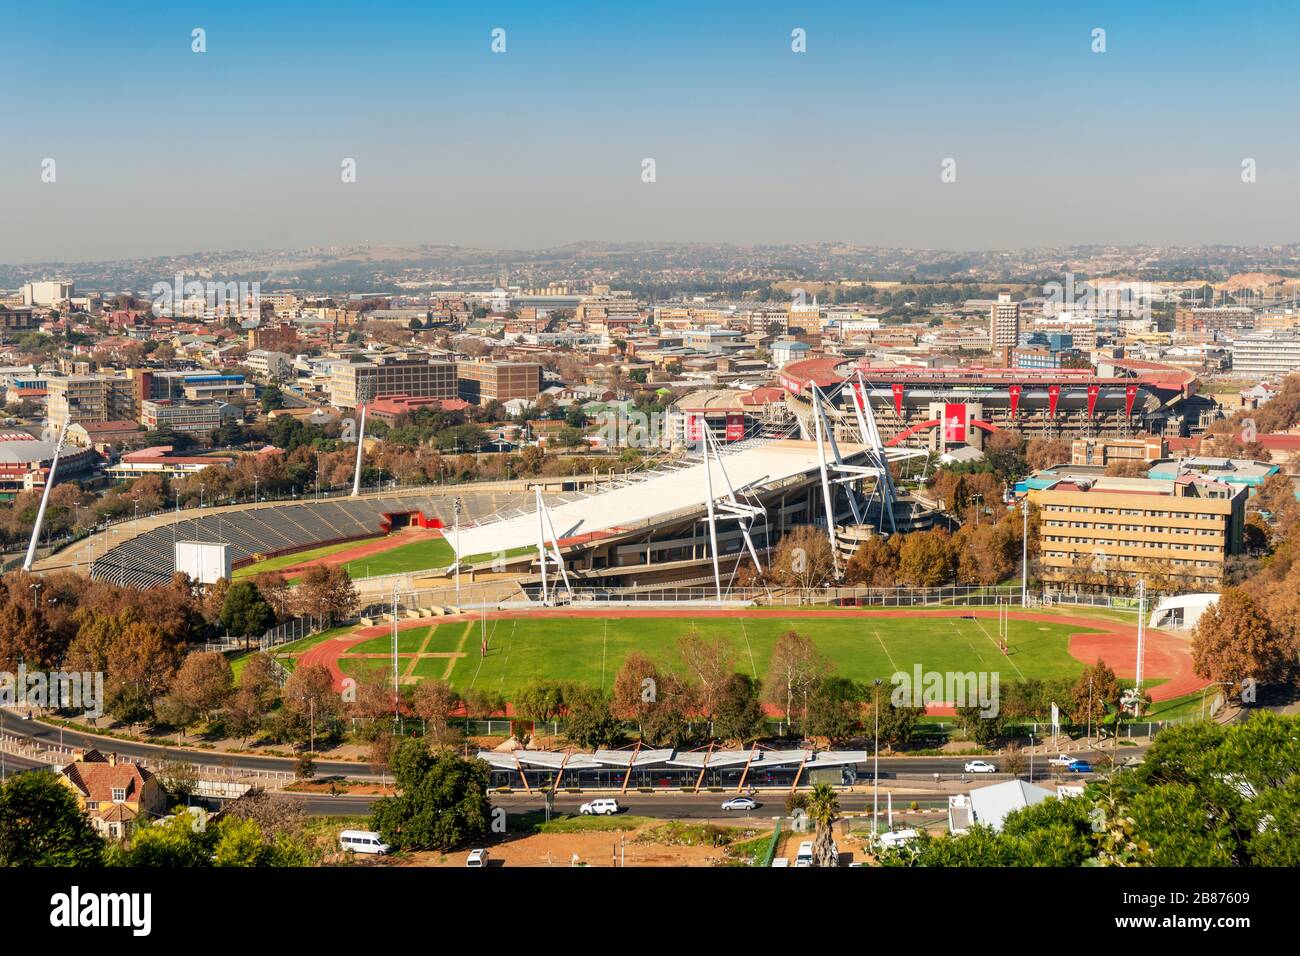 Johannesburg, South Africa - May 27, 2019: Emirates Airline Park wit many sport facilities Stock Photo